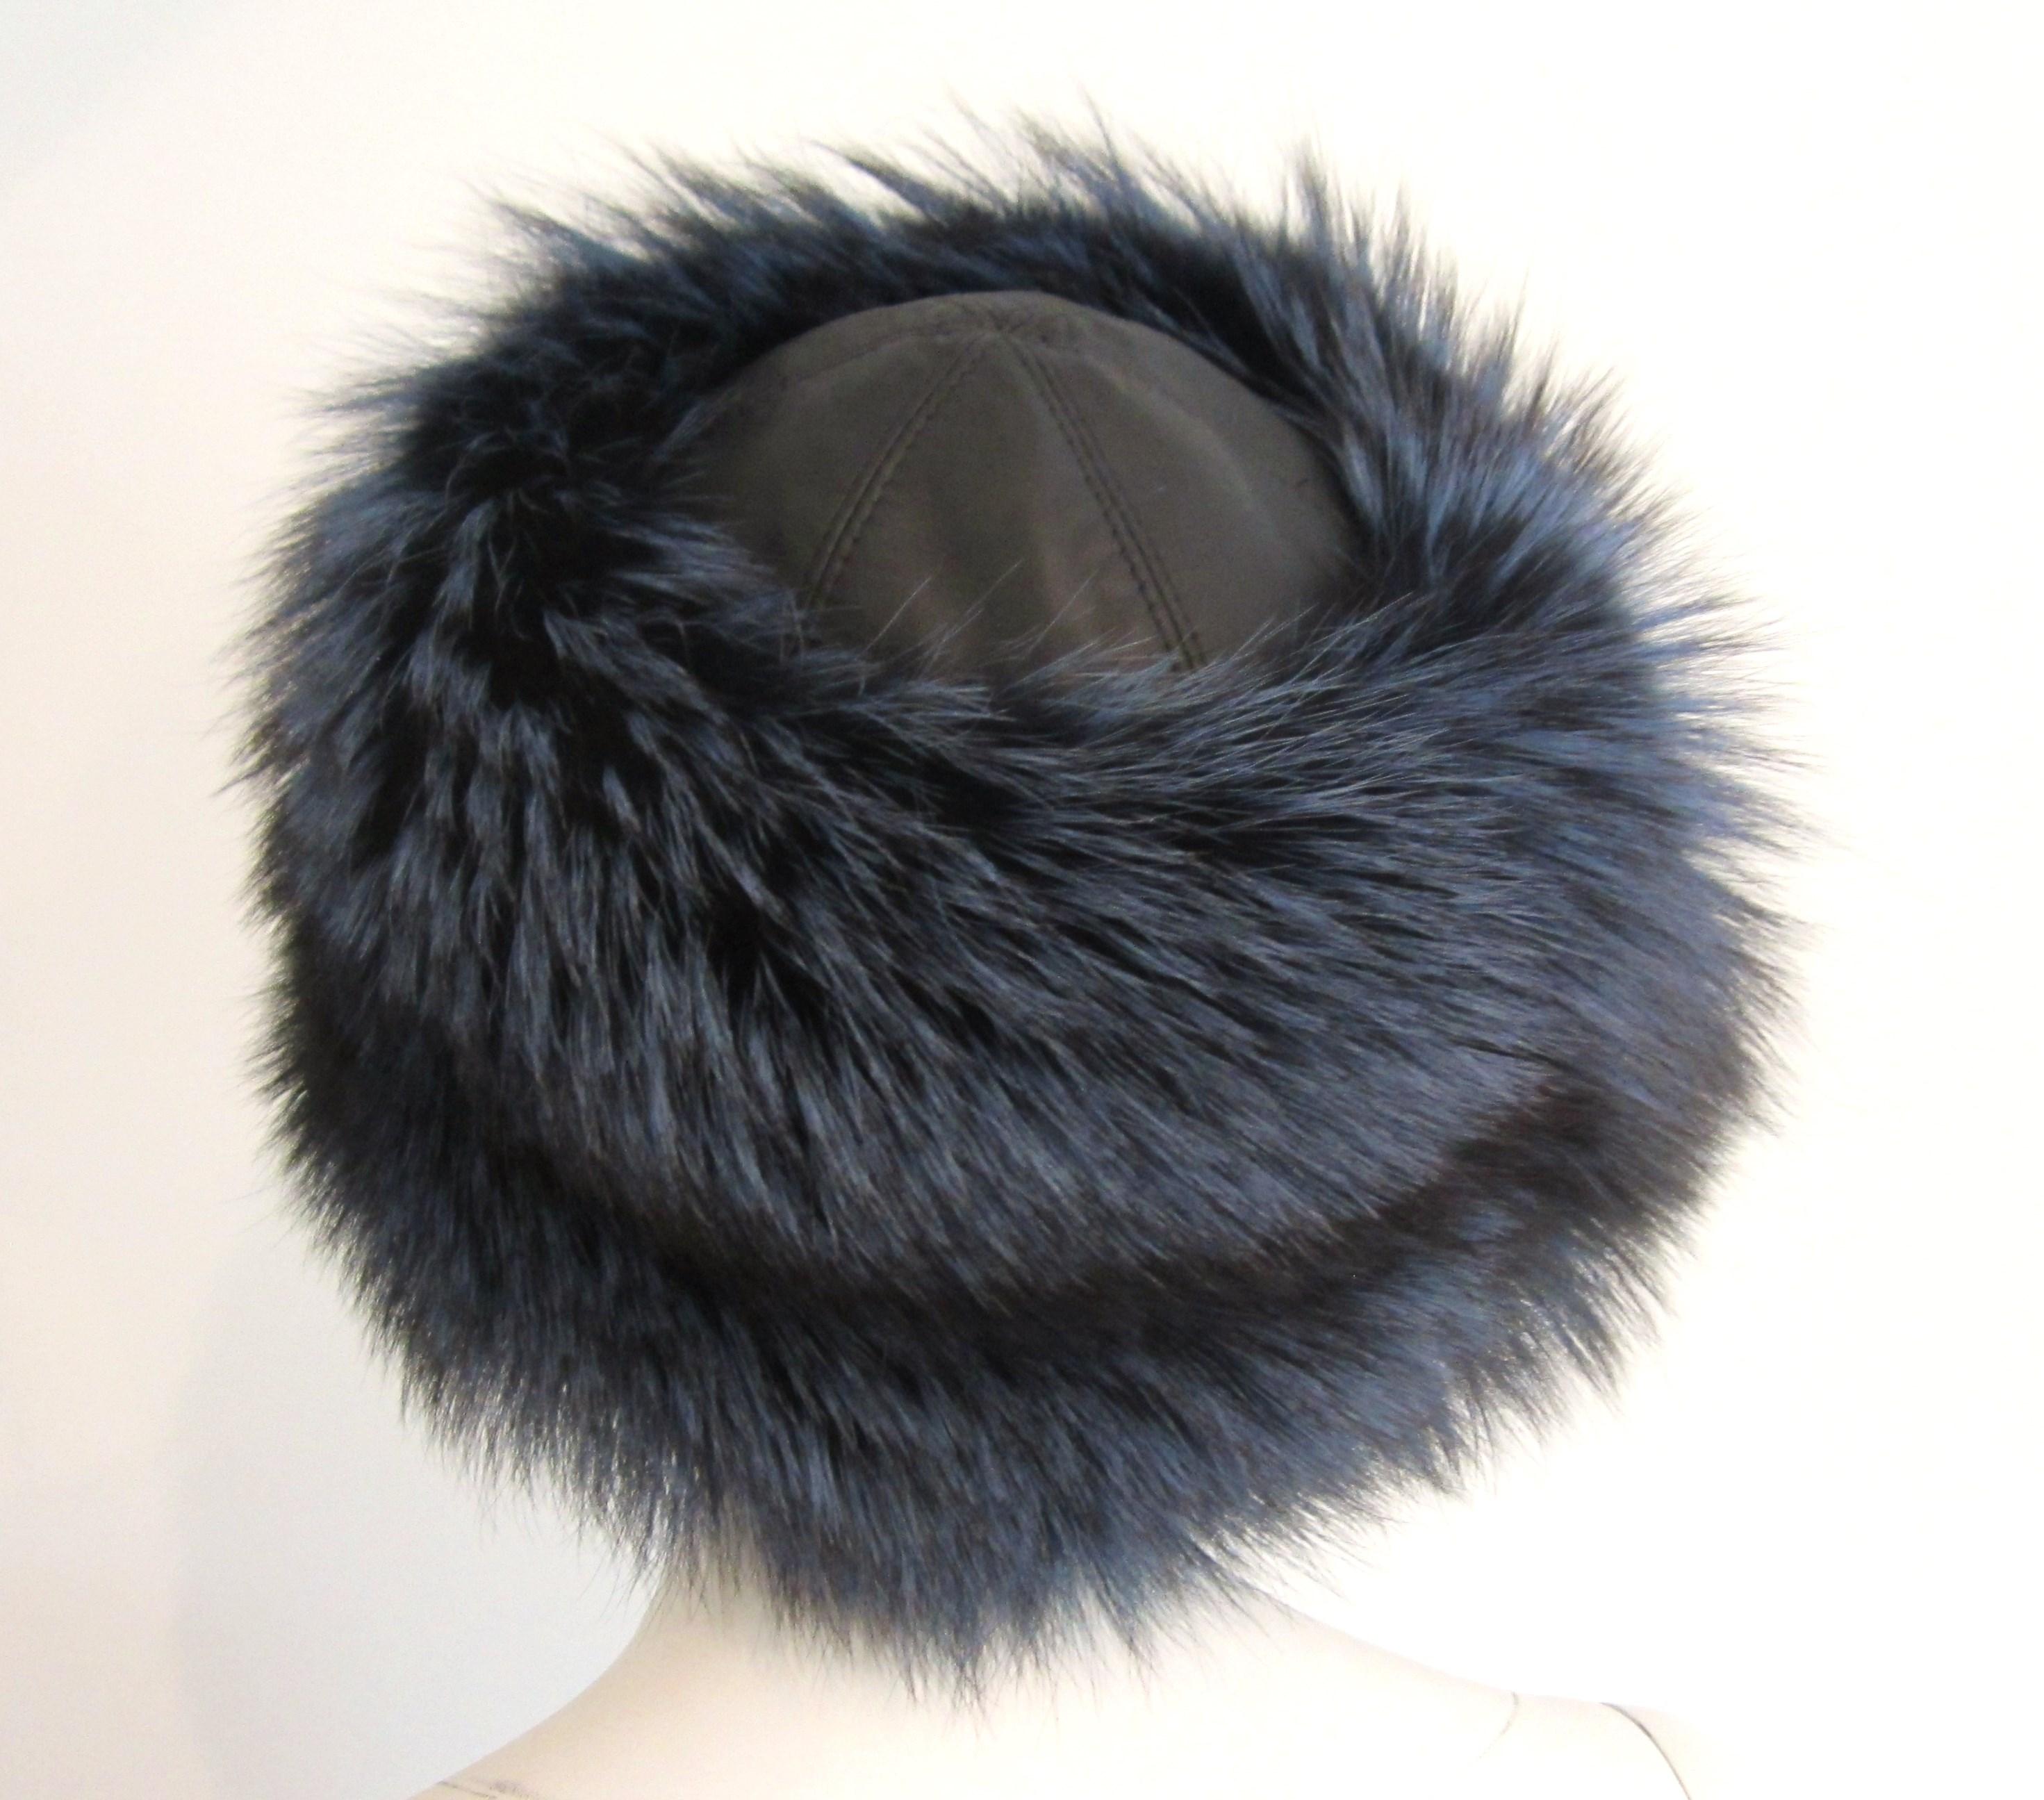 black hat with feather